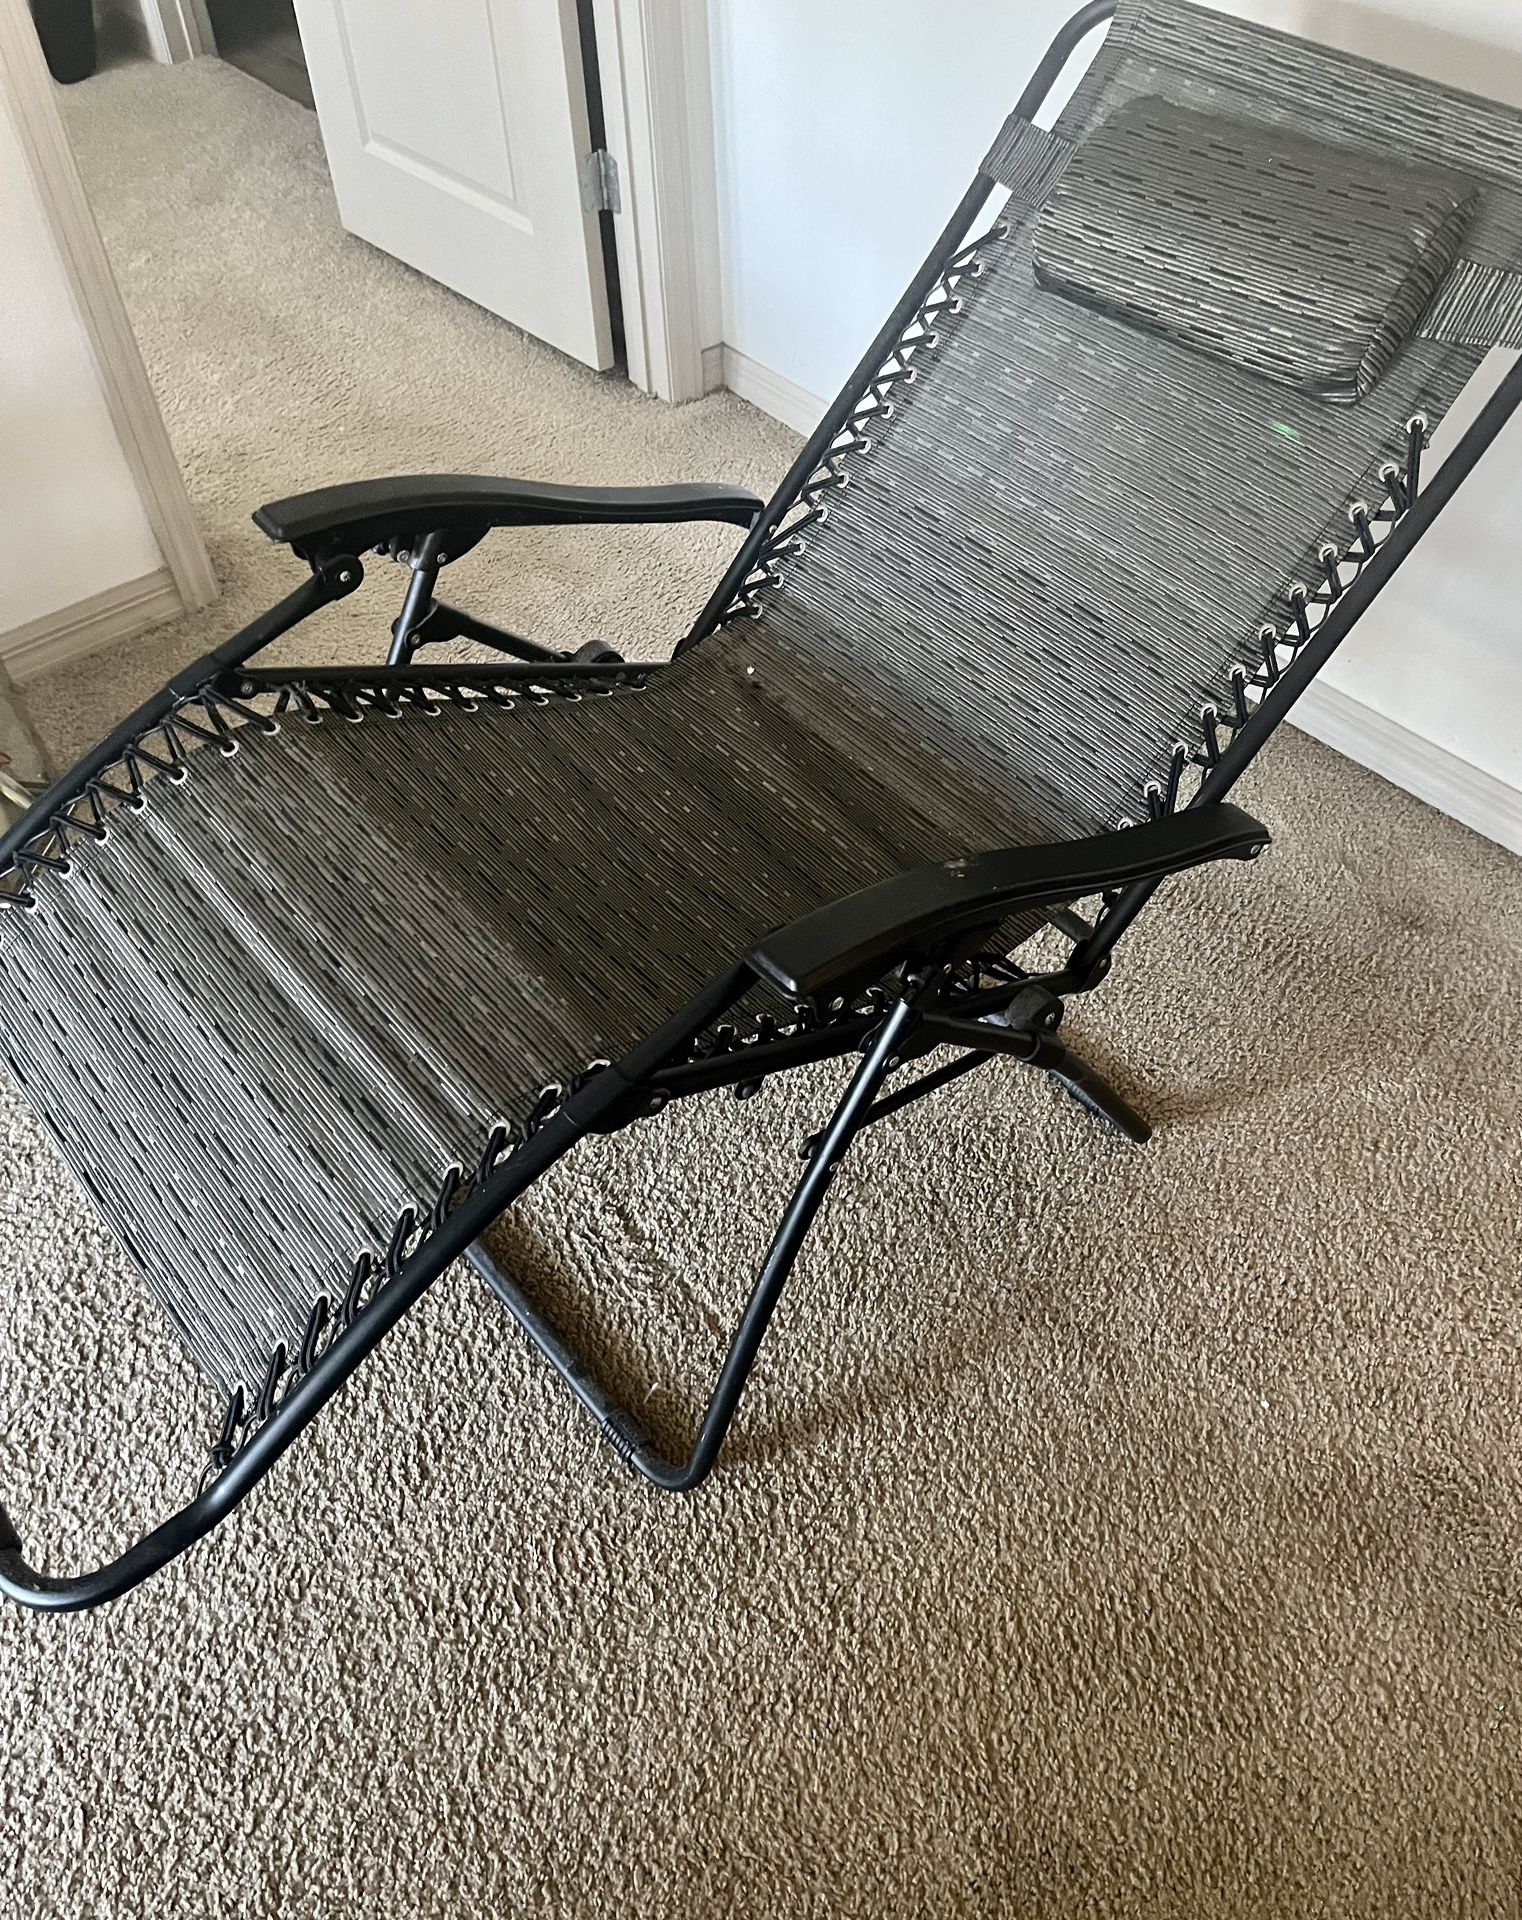 Patio-beach Reclining Chair. Price Negotiable. 